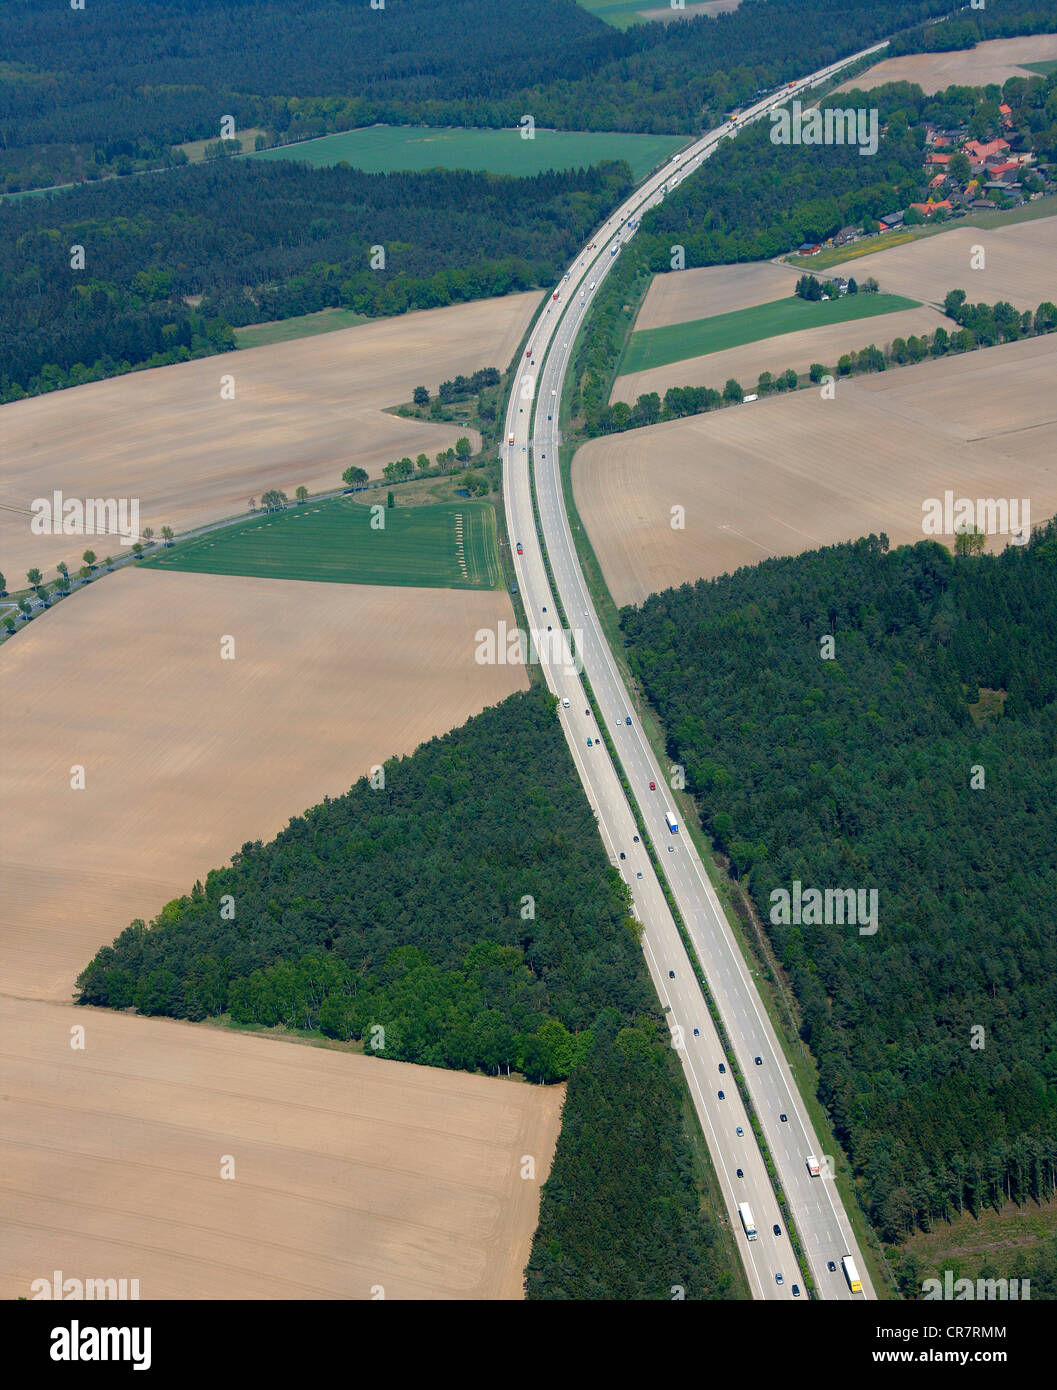 Aerial view, A7 freeway, curve, fields and forests, Bispingen, Lower Saxony, Germany, Europe Stock Photo